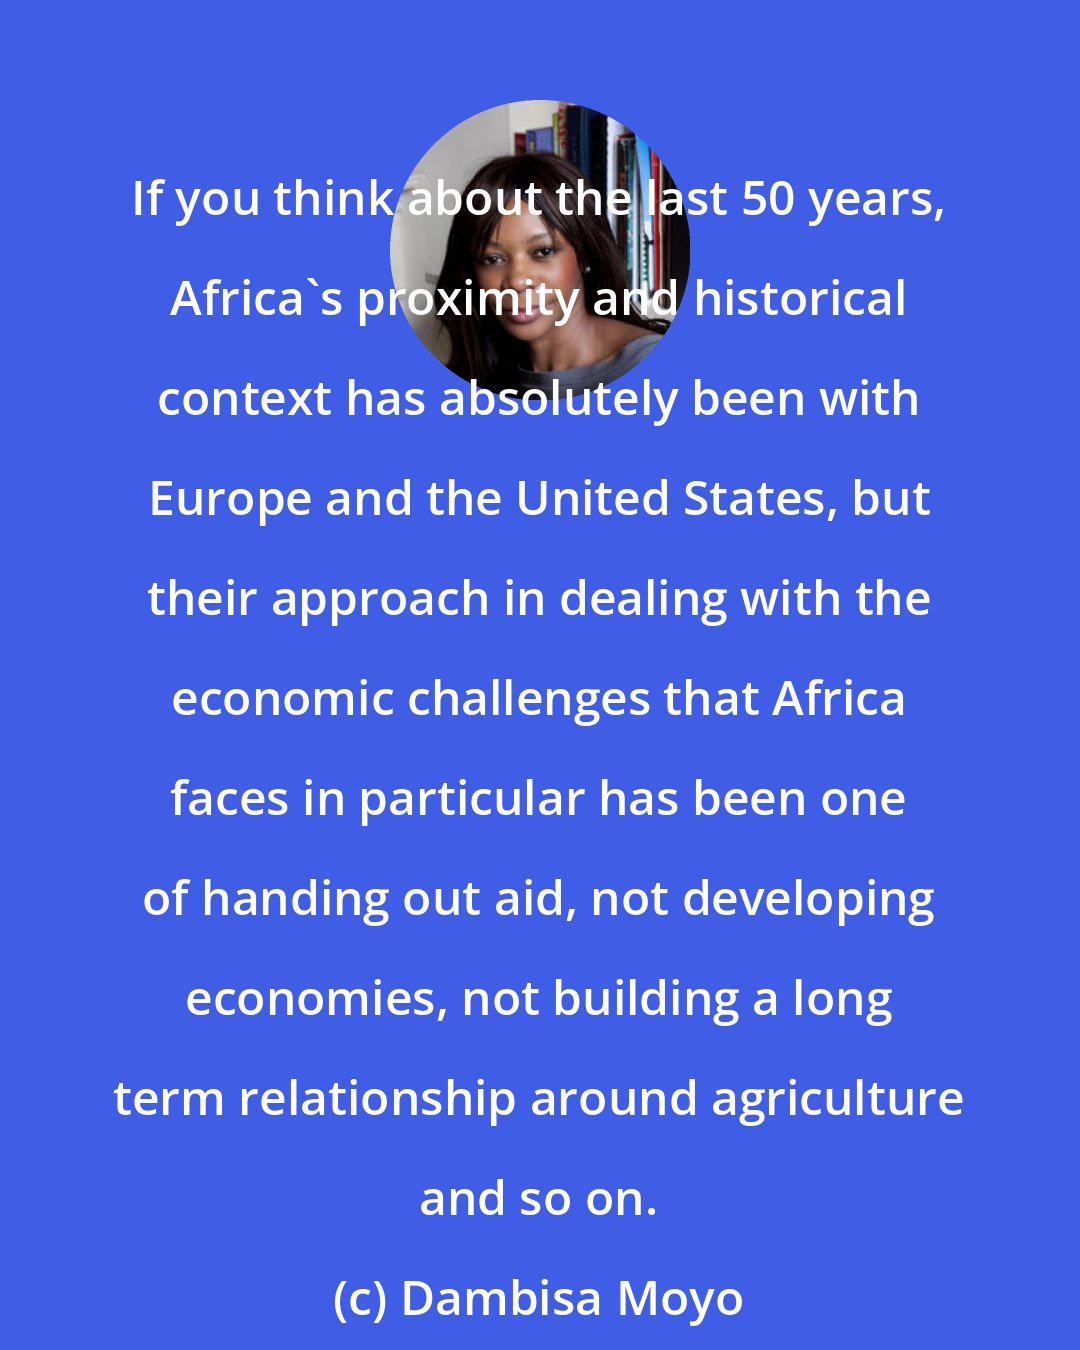 Dambisa Moyo: If you think about the last 50 years, Africa's proximity and historical context has absolutely been with Europe and the United States, but their approach in dealing with the economic challenges that Africa faces in particular has been one of handing out aid, not developing economies, not building a long term relationship around agriculture and so on.